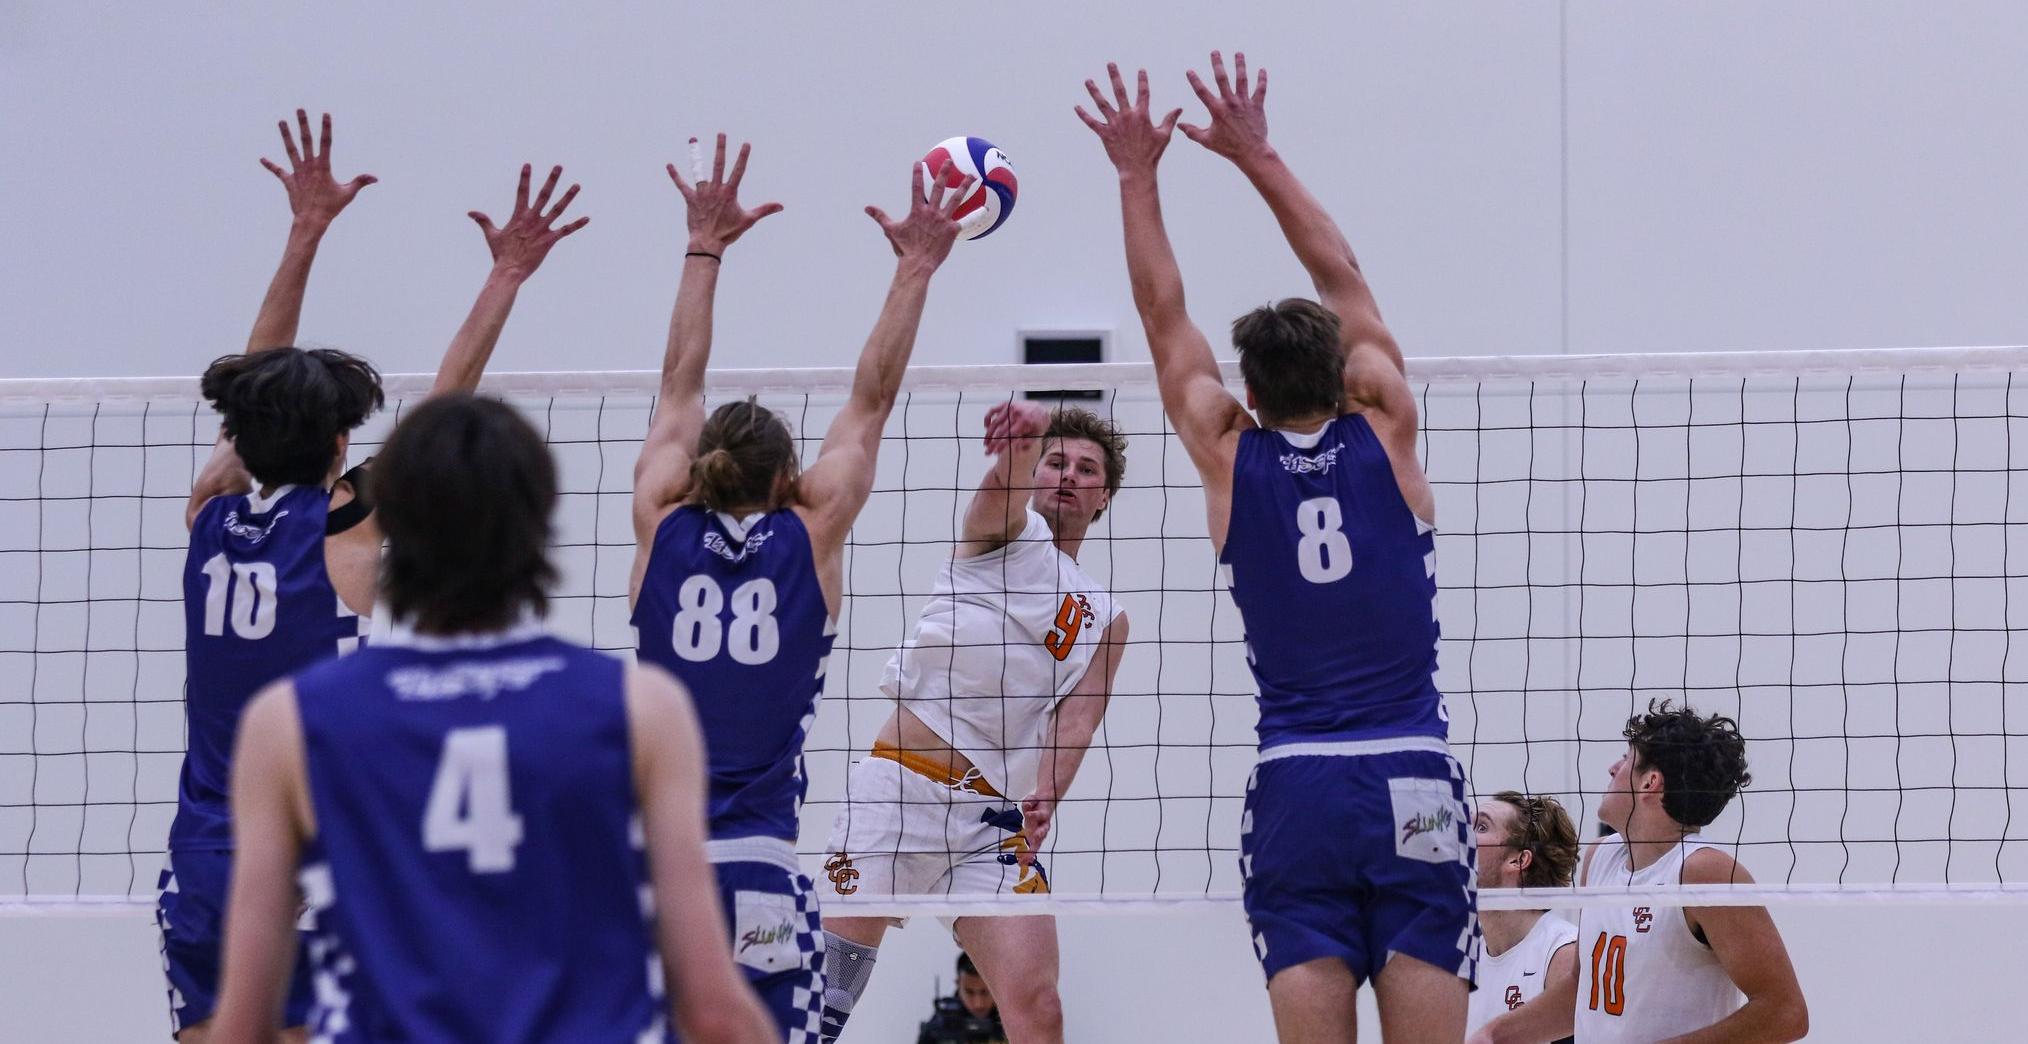 Men's volleyball team sees season end in state semifinals